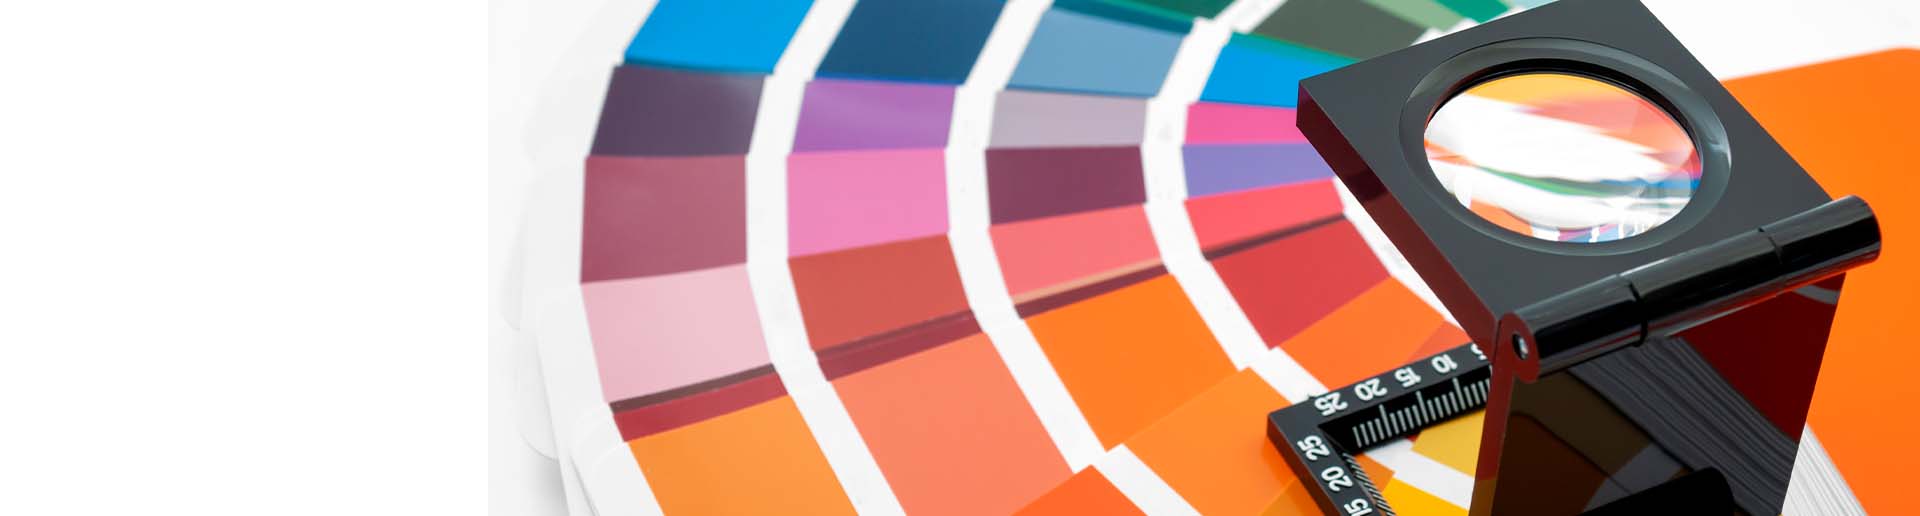 The Psychology of Color in Franchise Branding and Design  